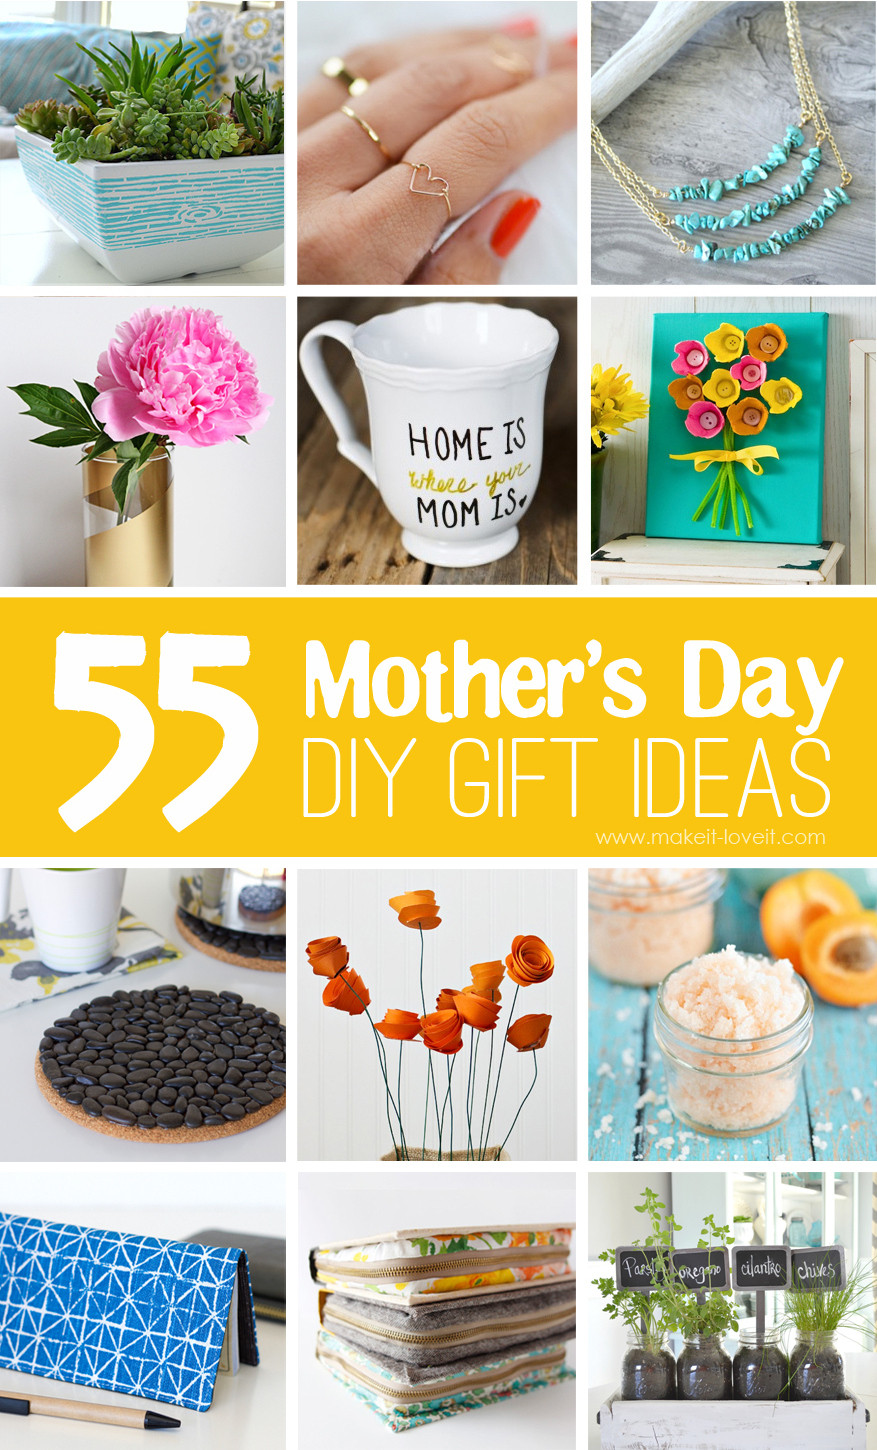 Gift Ideas For A Mother
 55 Mother s Day DIY Gift Ideas